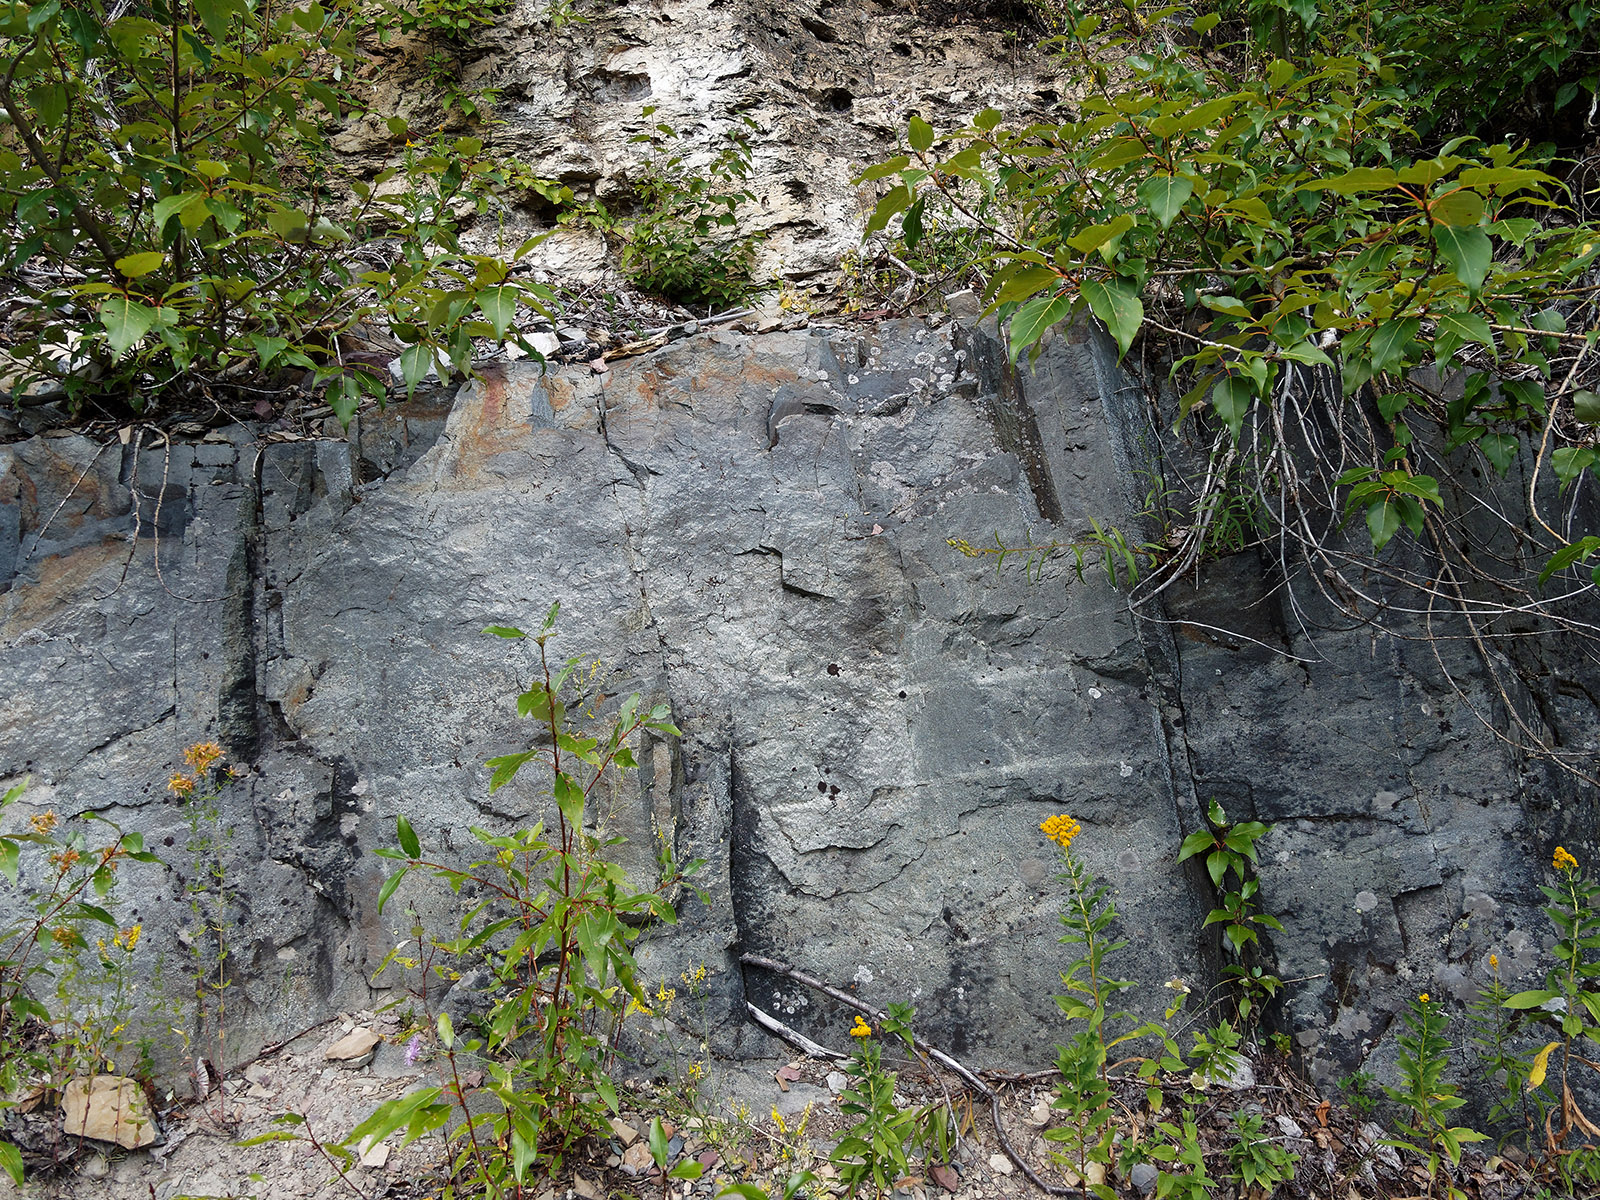 Igneous sill in Helena formation.  A thick layer of diorite is an igneous intrusion that occurred in the sedimentary layer.  Diorite is an igneous rock with characteristics intermediate between granite and gabbro with respect to silica, iron and magnesium concentration.